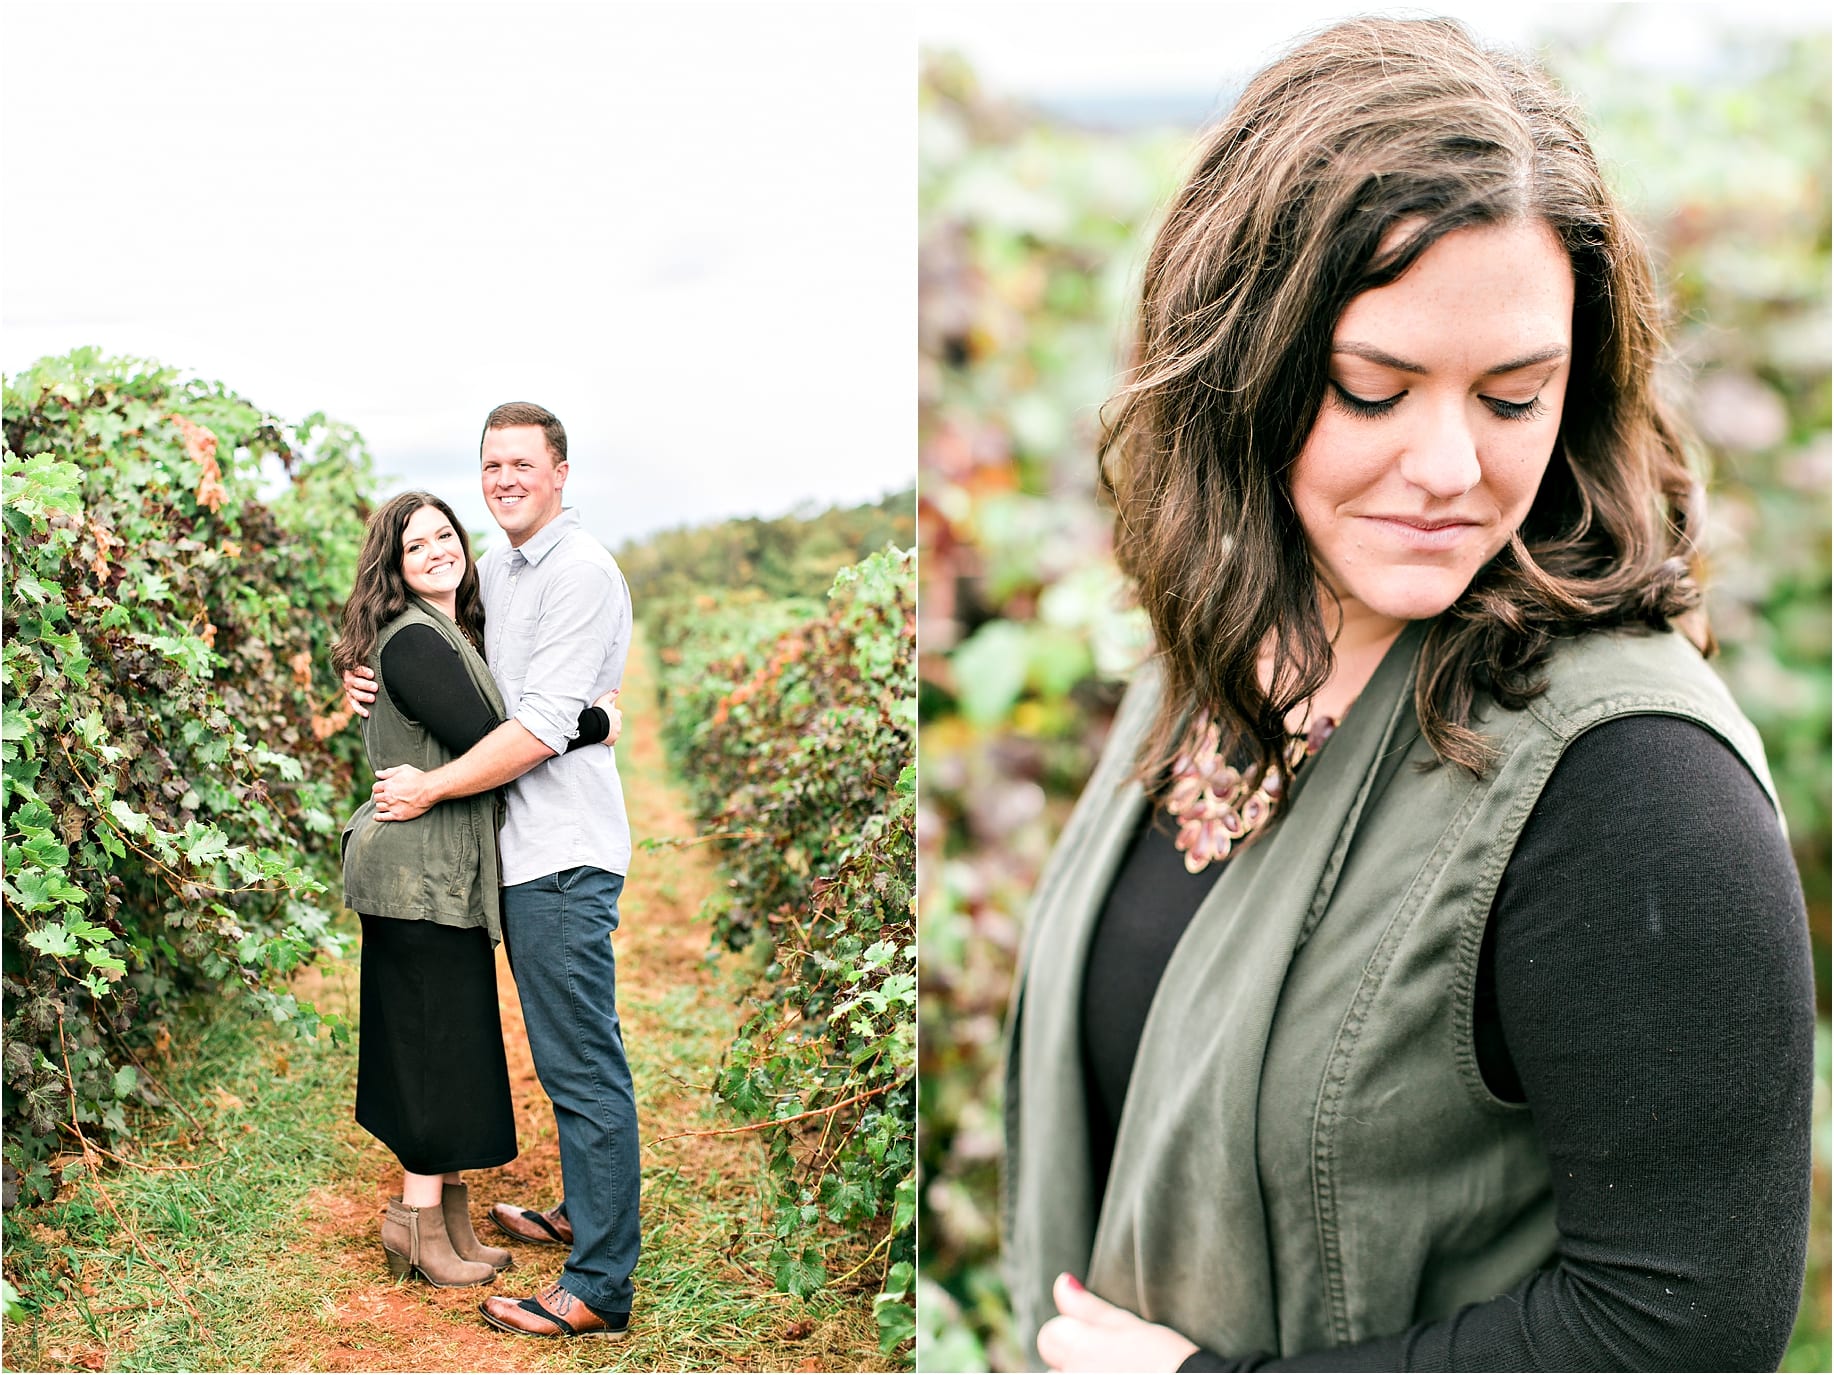 carters mountain engagement pictures charlottesville virginia